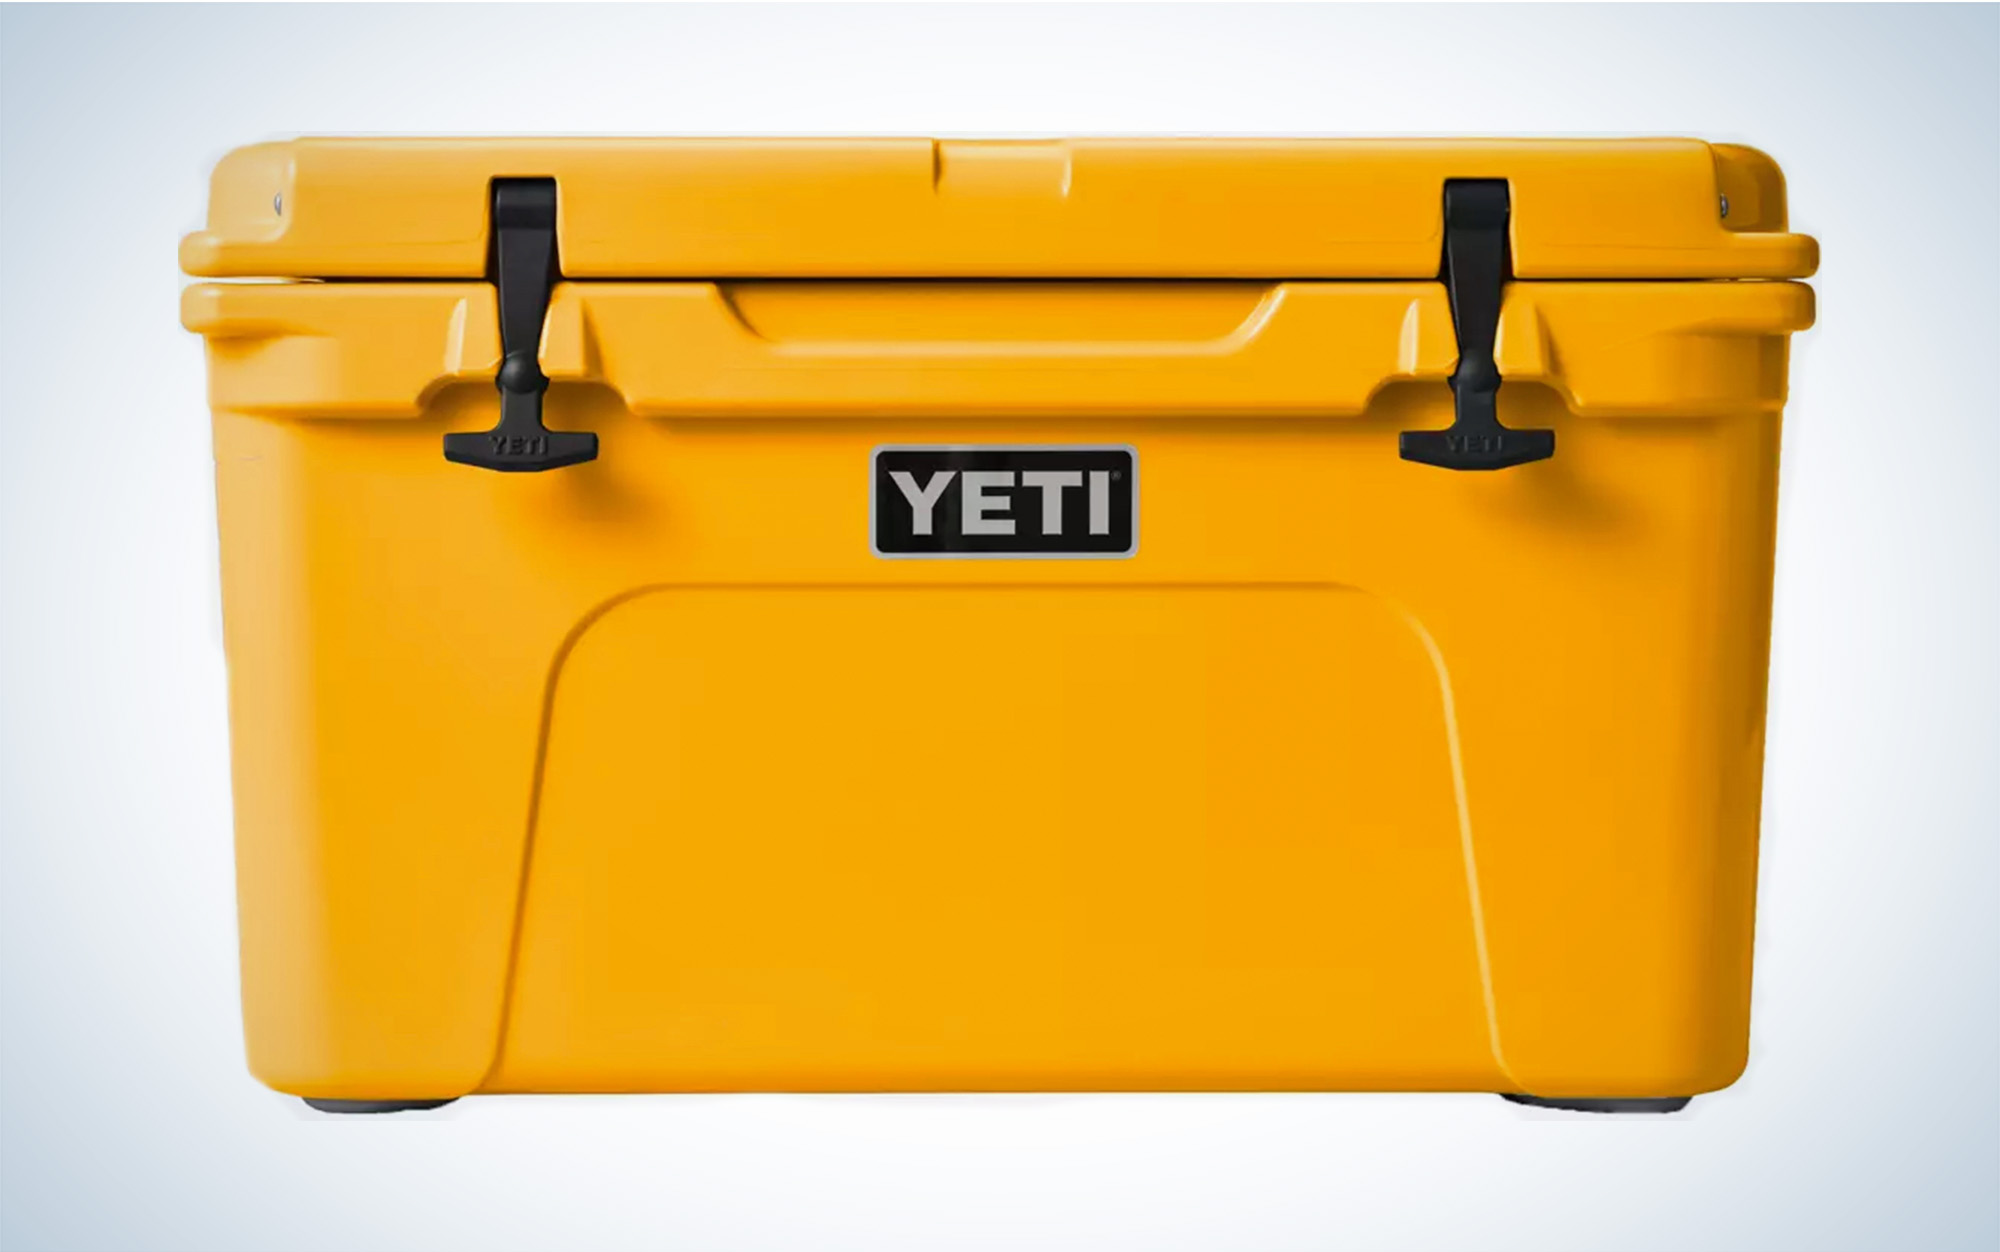 Yeti Tundra is the best overall boat cooler